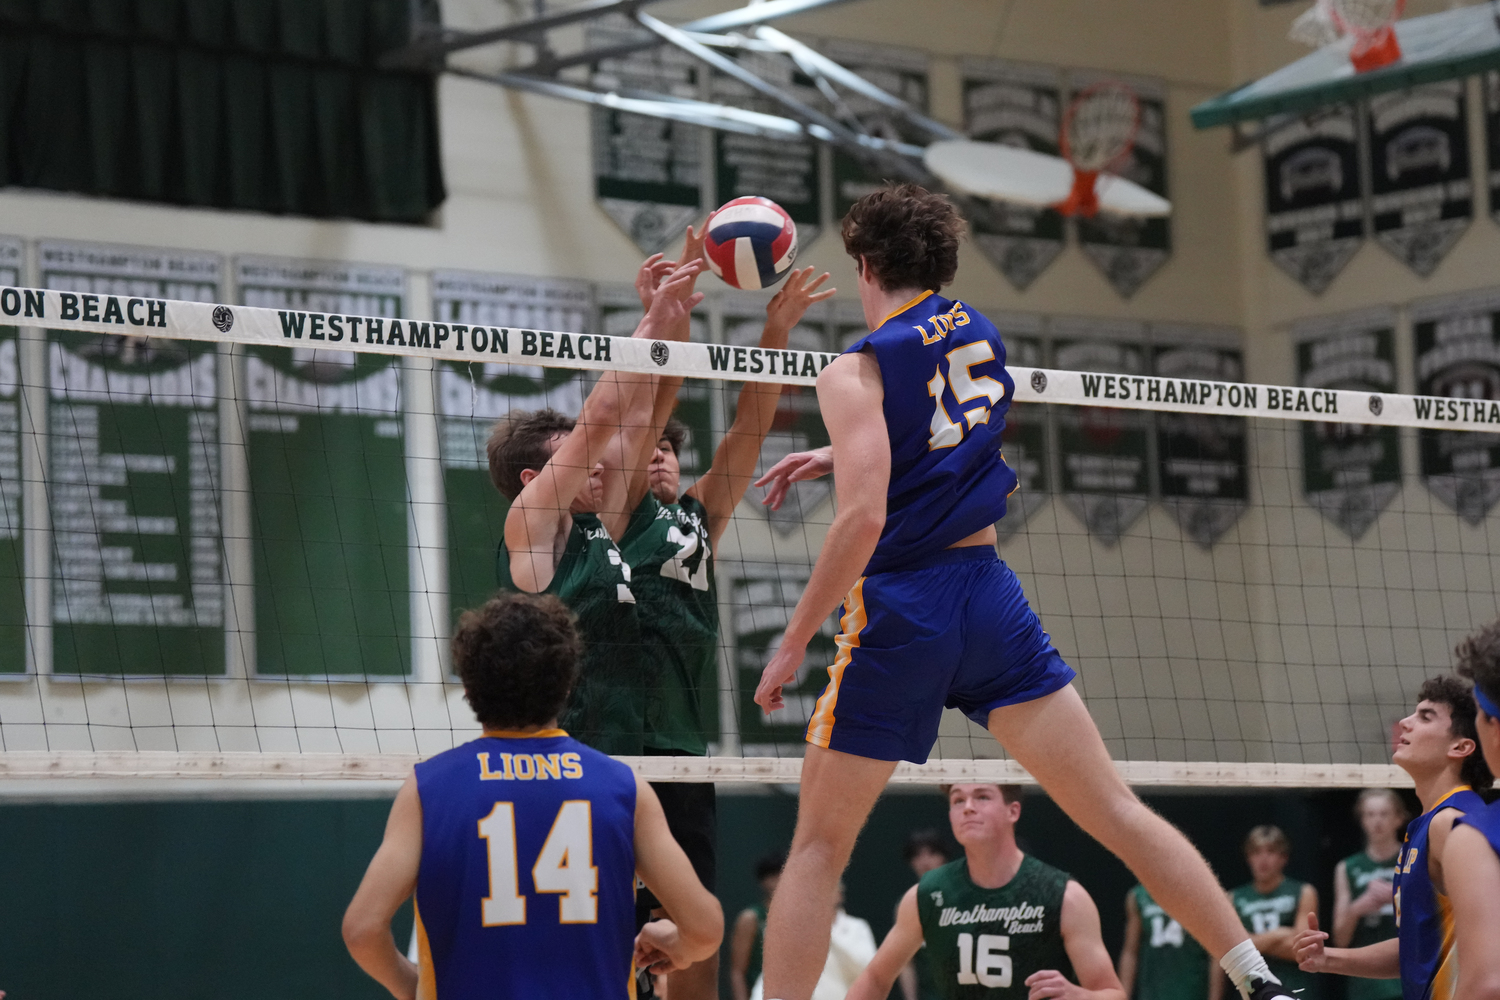 Senior setter Seth Terry and junior middle hitter James Monserrate go up for the block. RON ESPOSITO